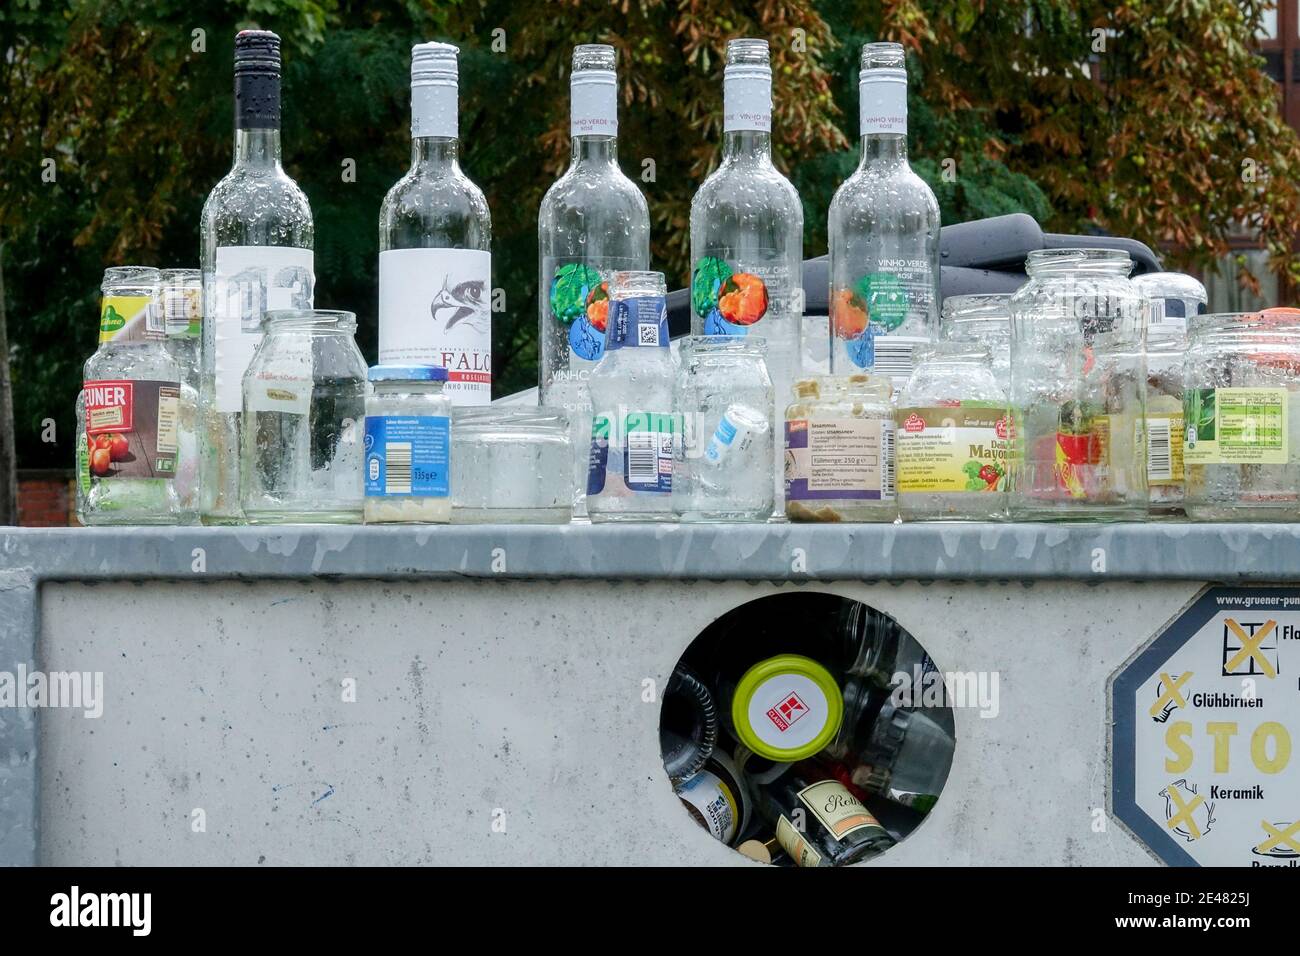 Full container on the used glass. empty bottles recycling box Germany Stock Photo